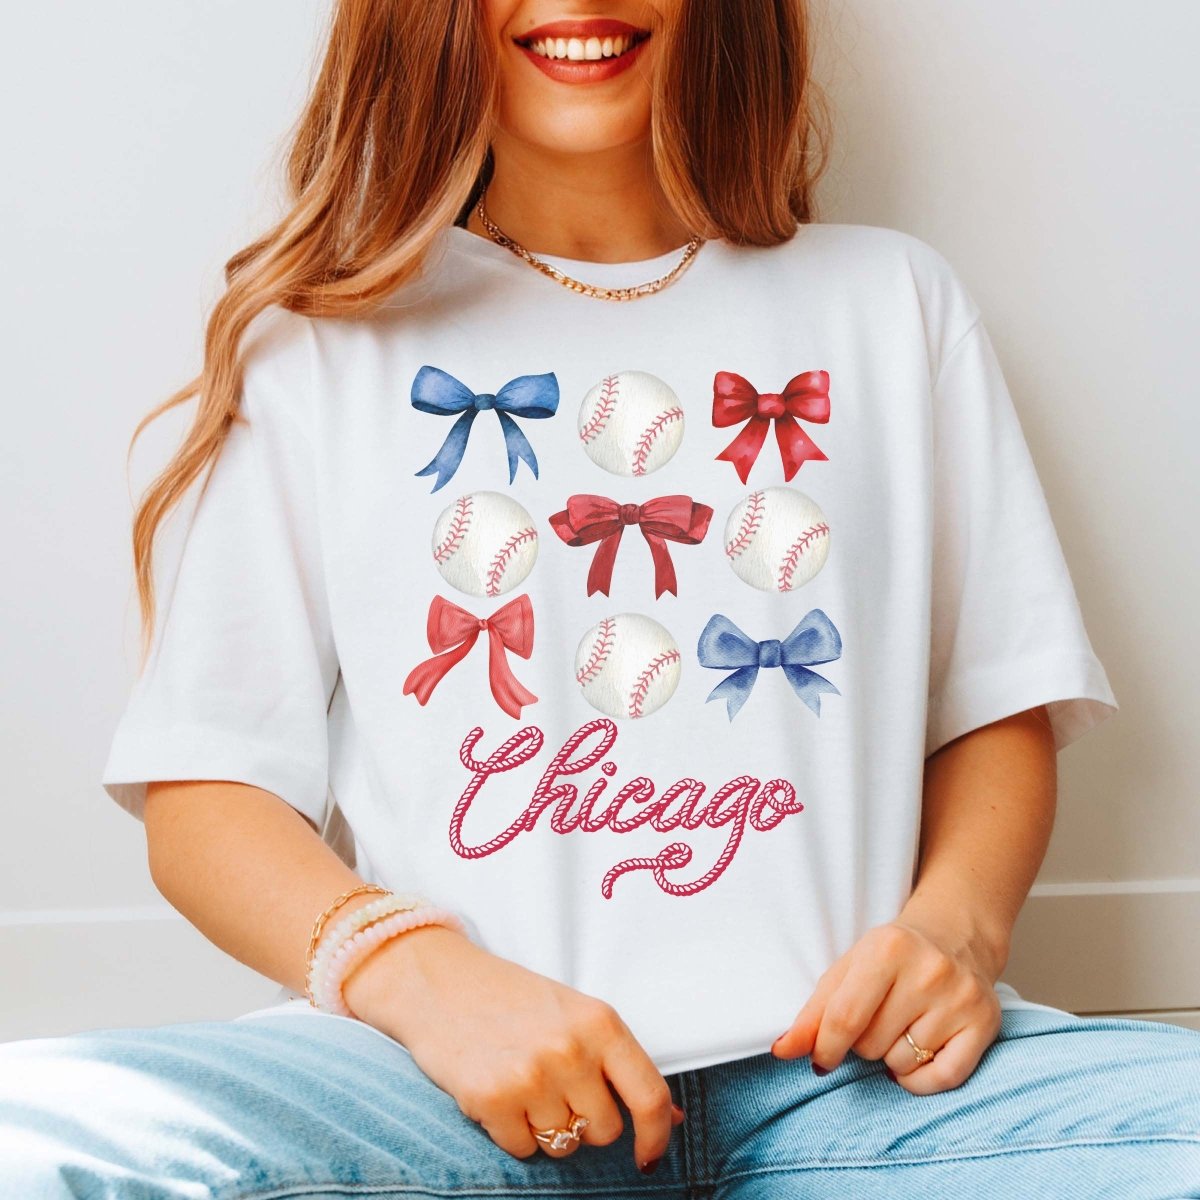 Chicago Bows And Baseballs Tee - Limeberry Designs